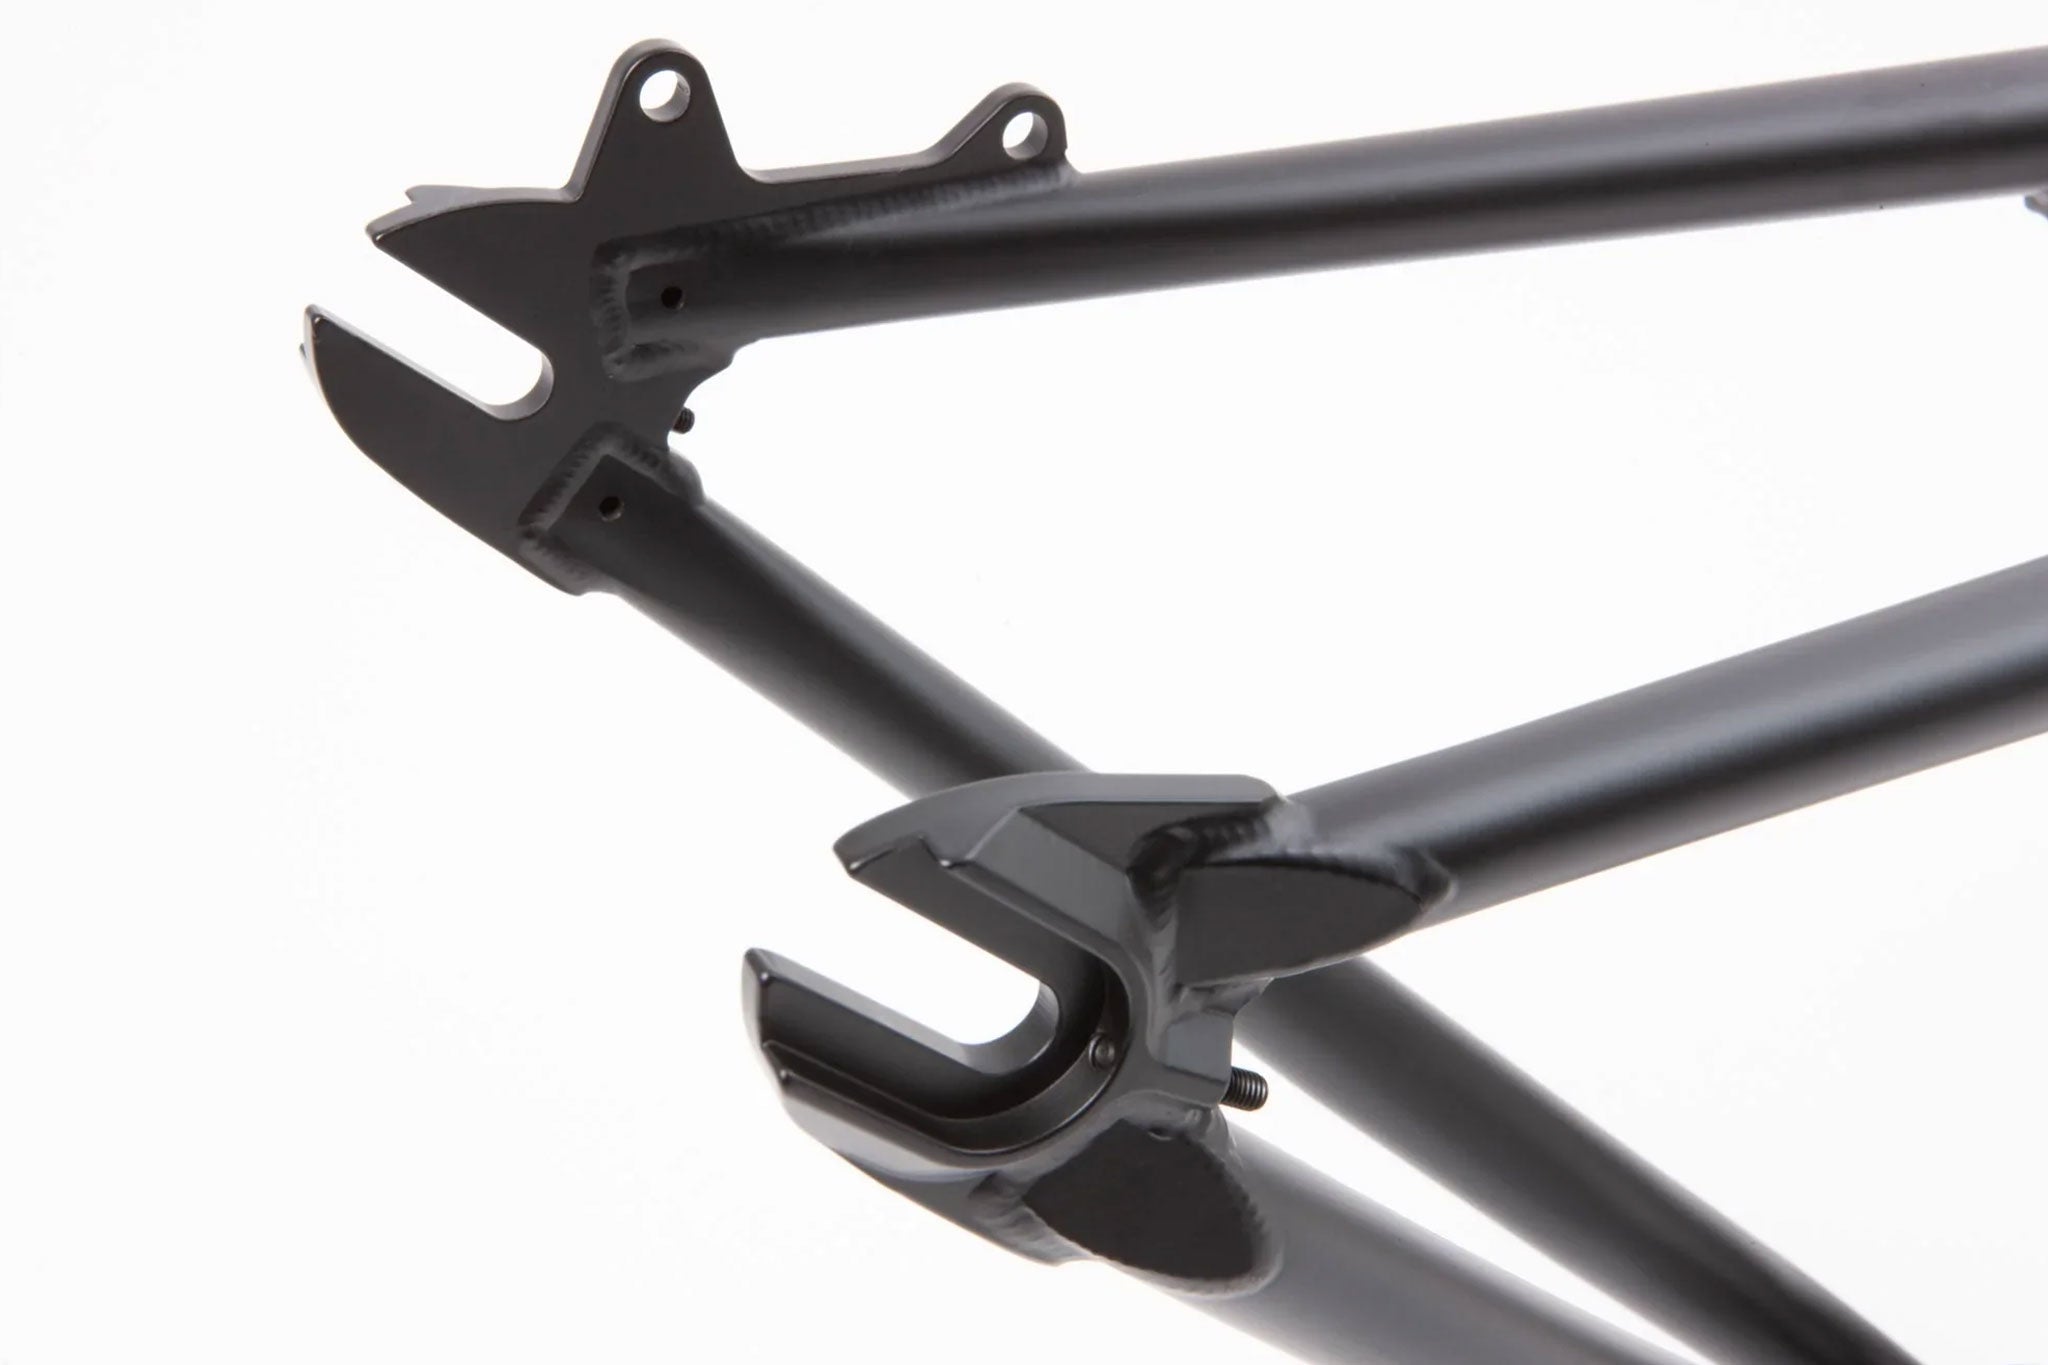 Fairdale Hareraiser Frame Dropouts and Chain Adjusters